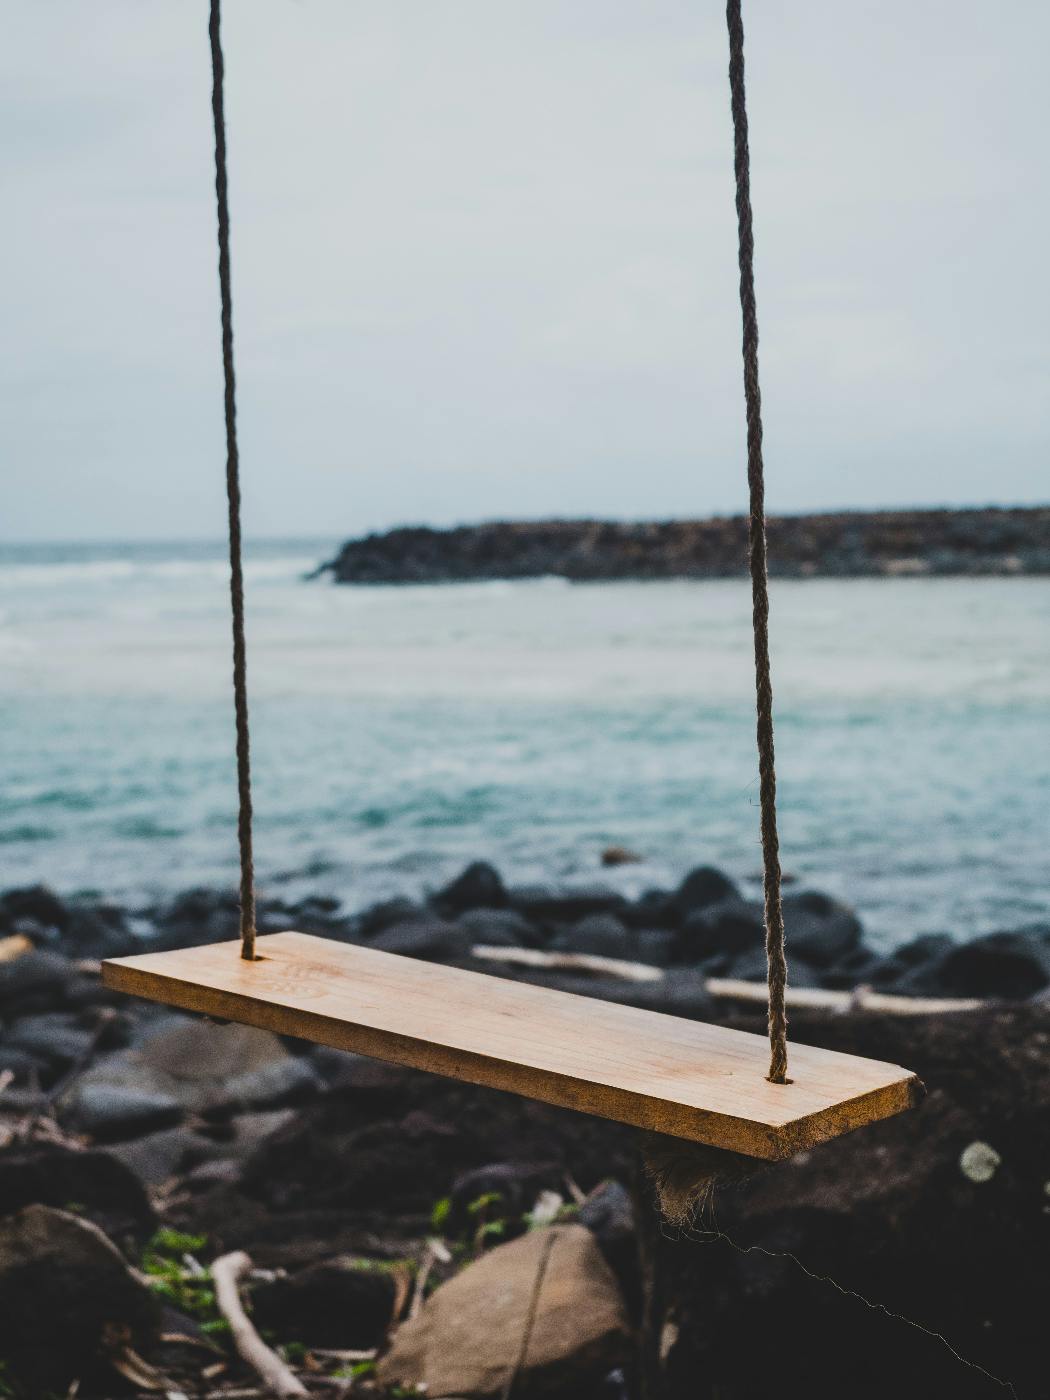 A wooden swing by the ocean